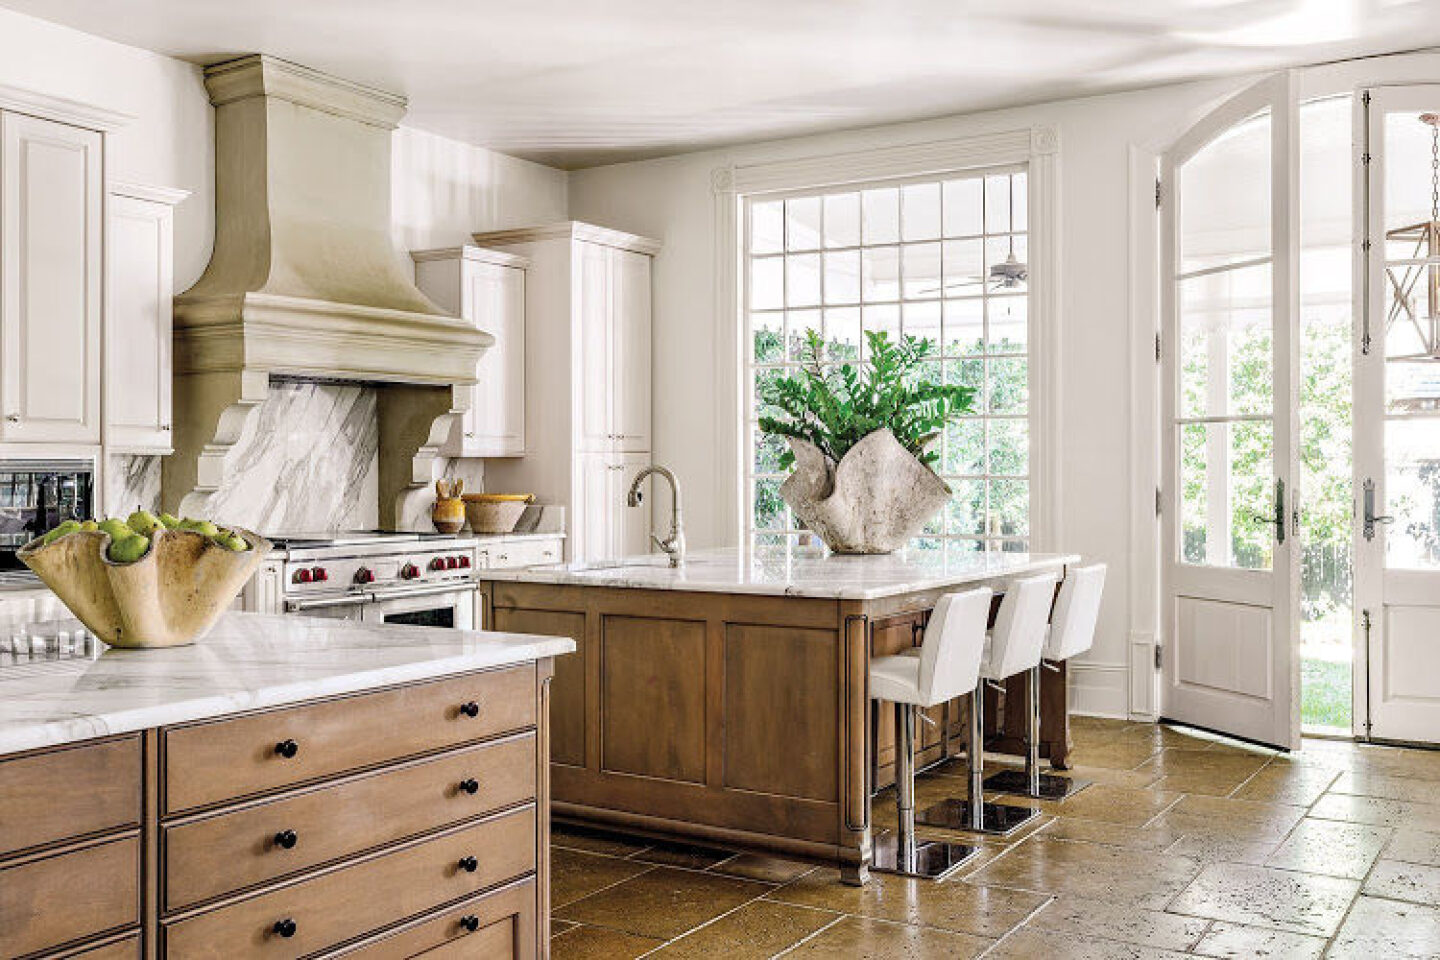 Tara Shaw designed Old World style kitchen - from her book Soul of the Home. #frenchkitchen #tarashaw